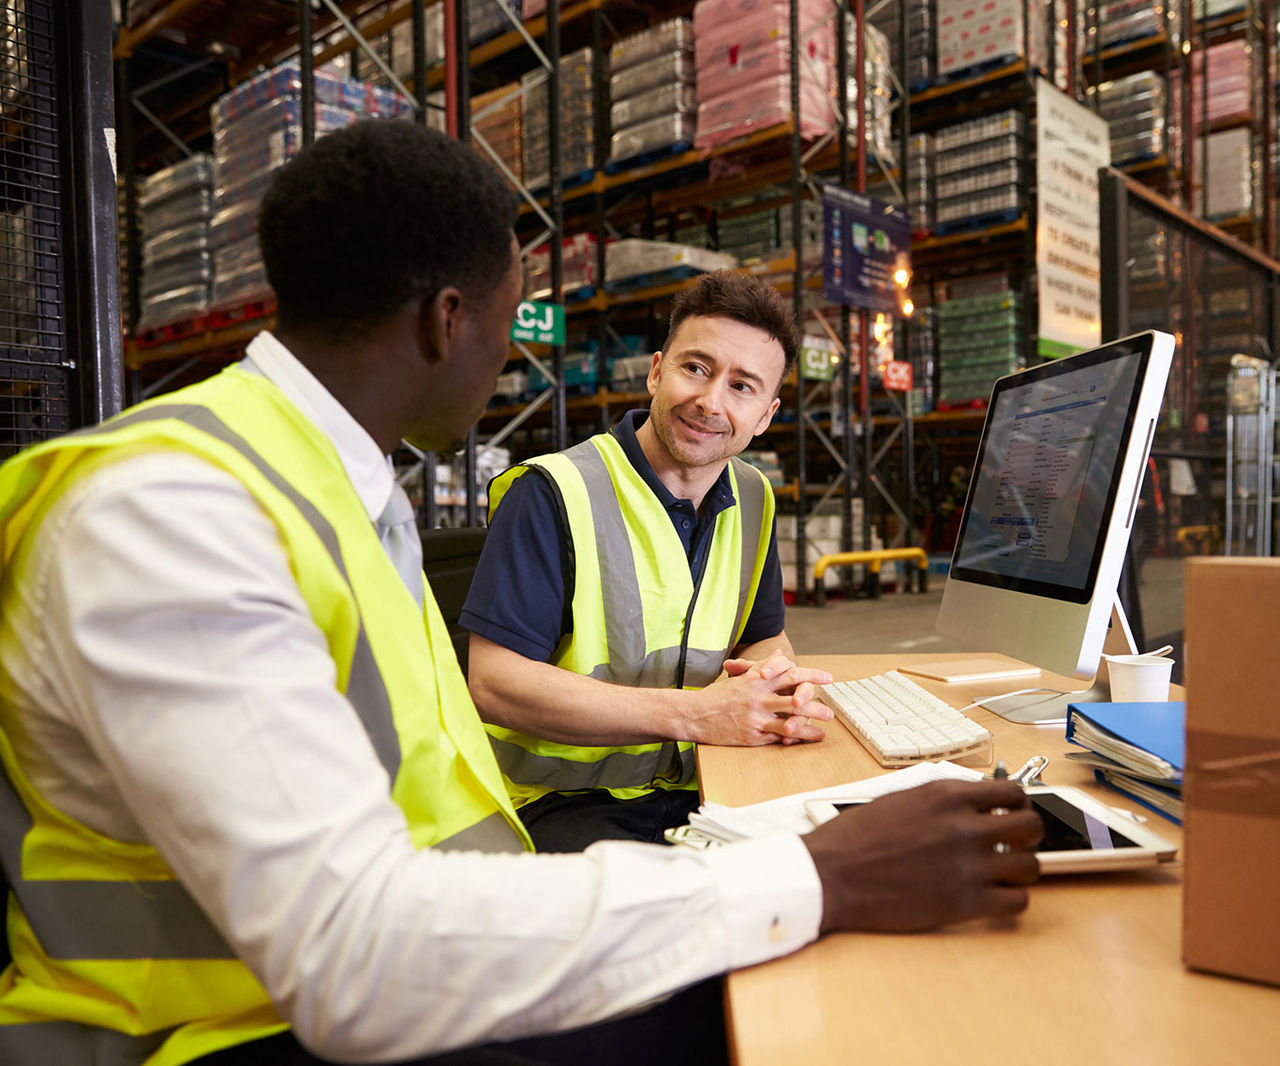 Staff discuss warehouse logistics in an on-site office